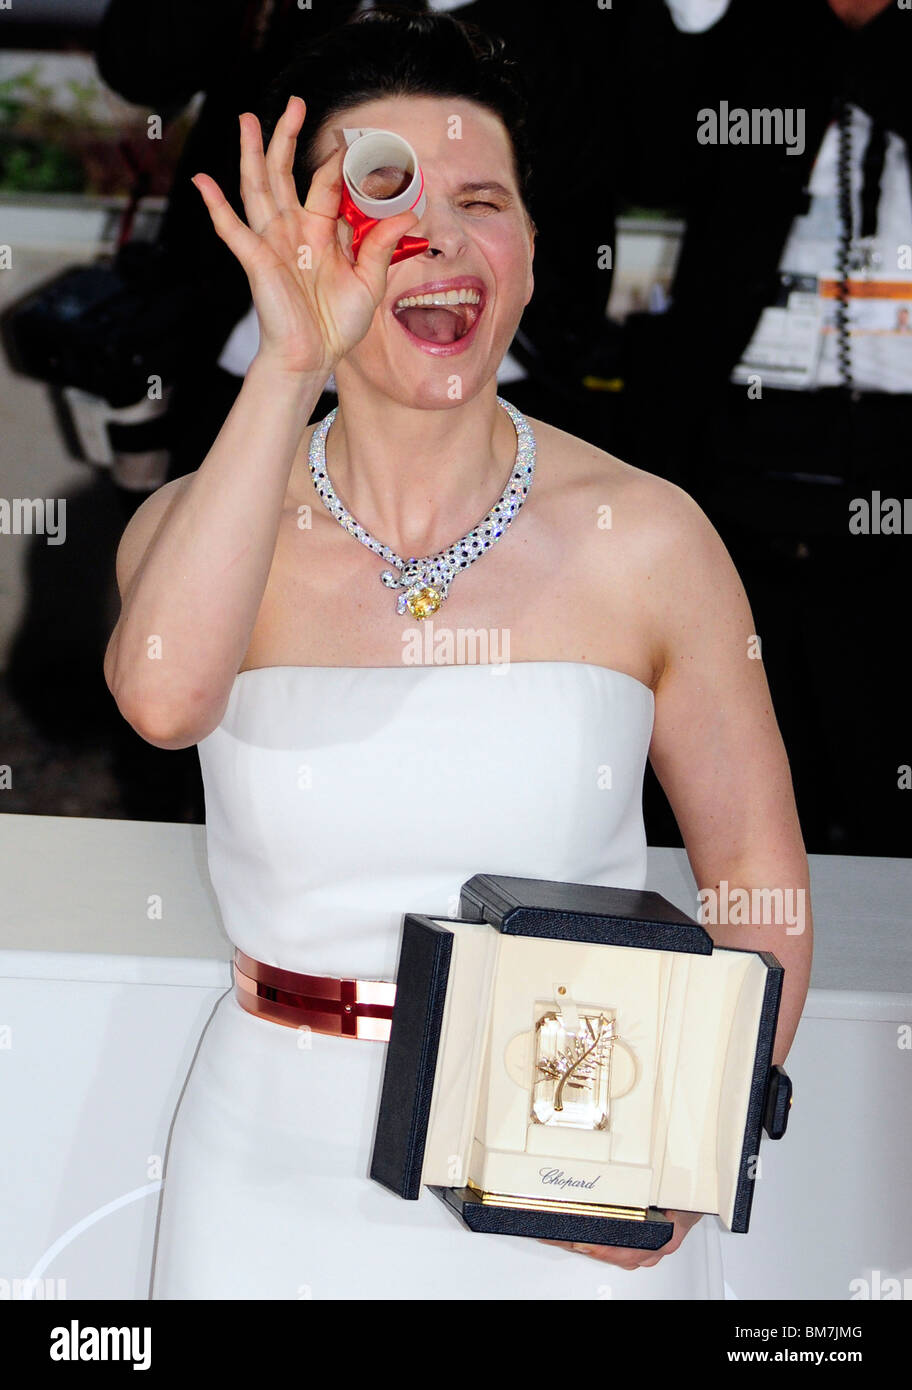 Juliette Binoche pose after winning the Best Actress award for her role in 'Certified Copy' during the 2010 Cannes film festival Stock Photo